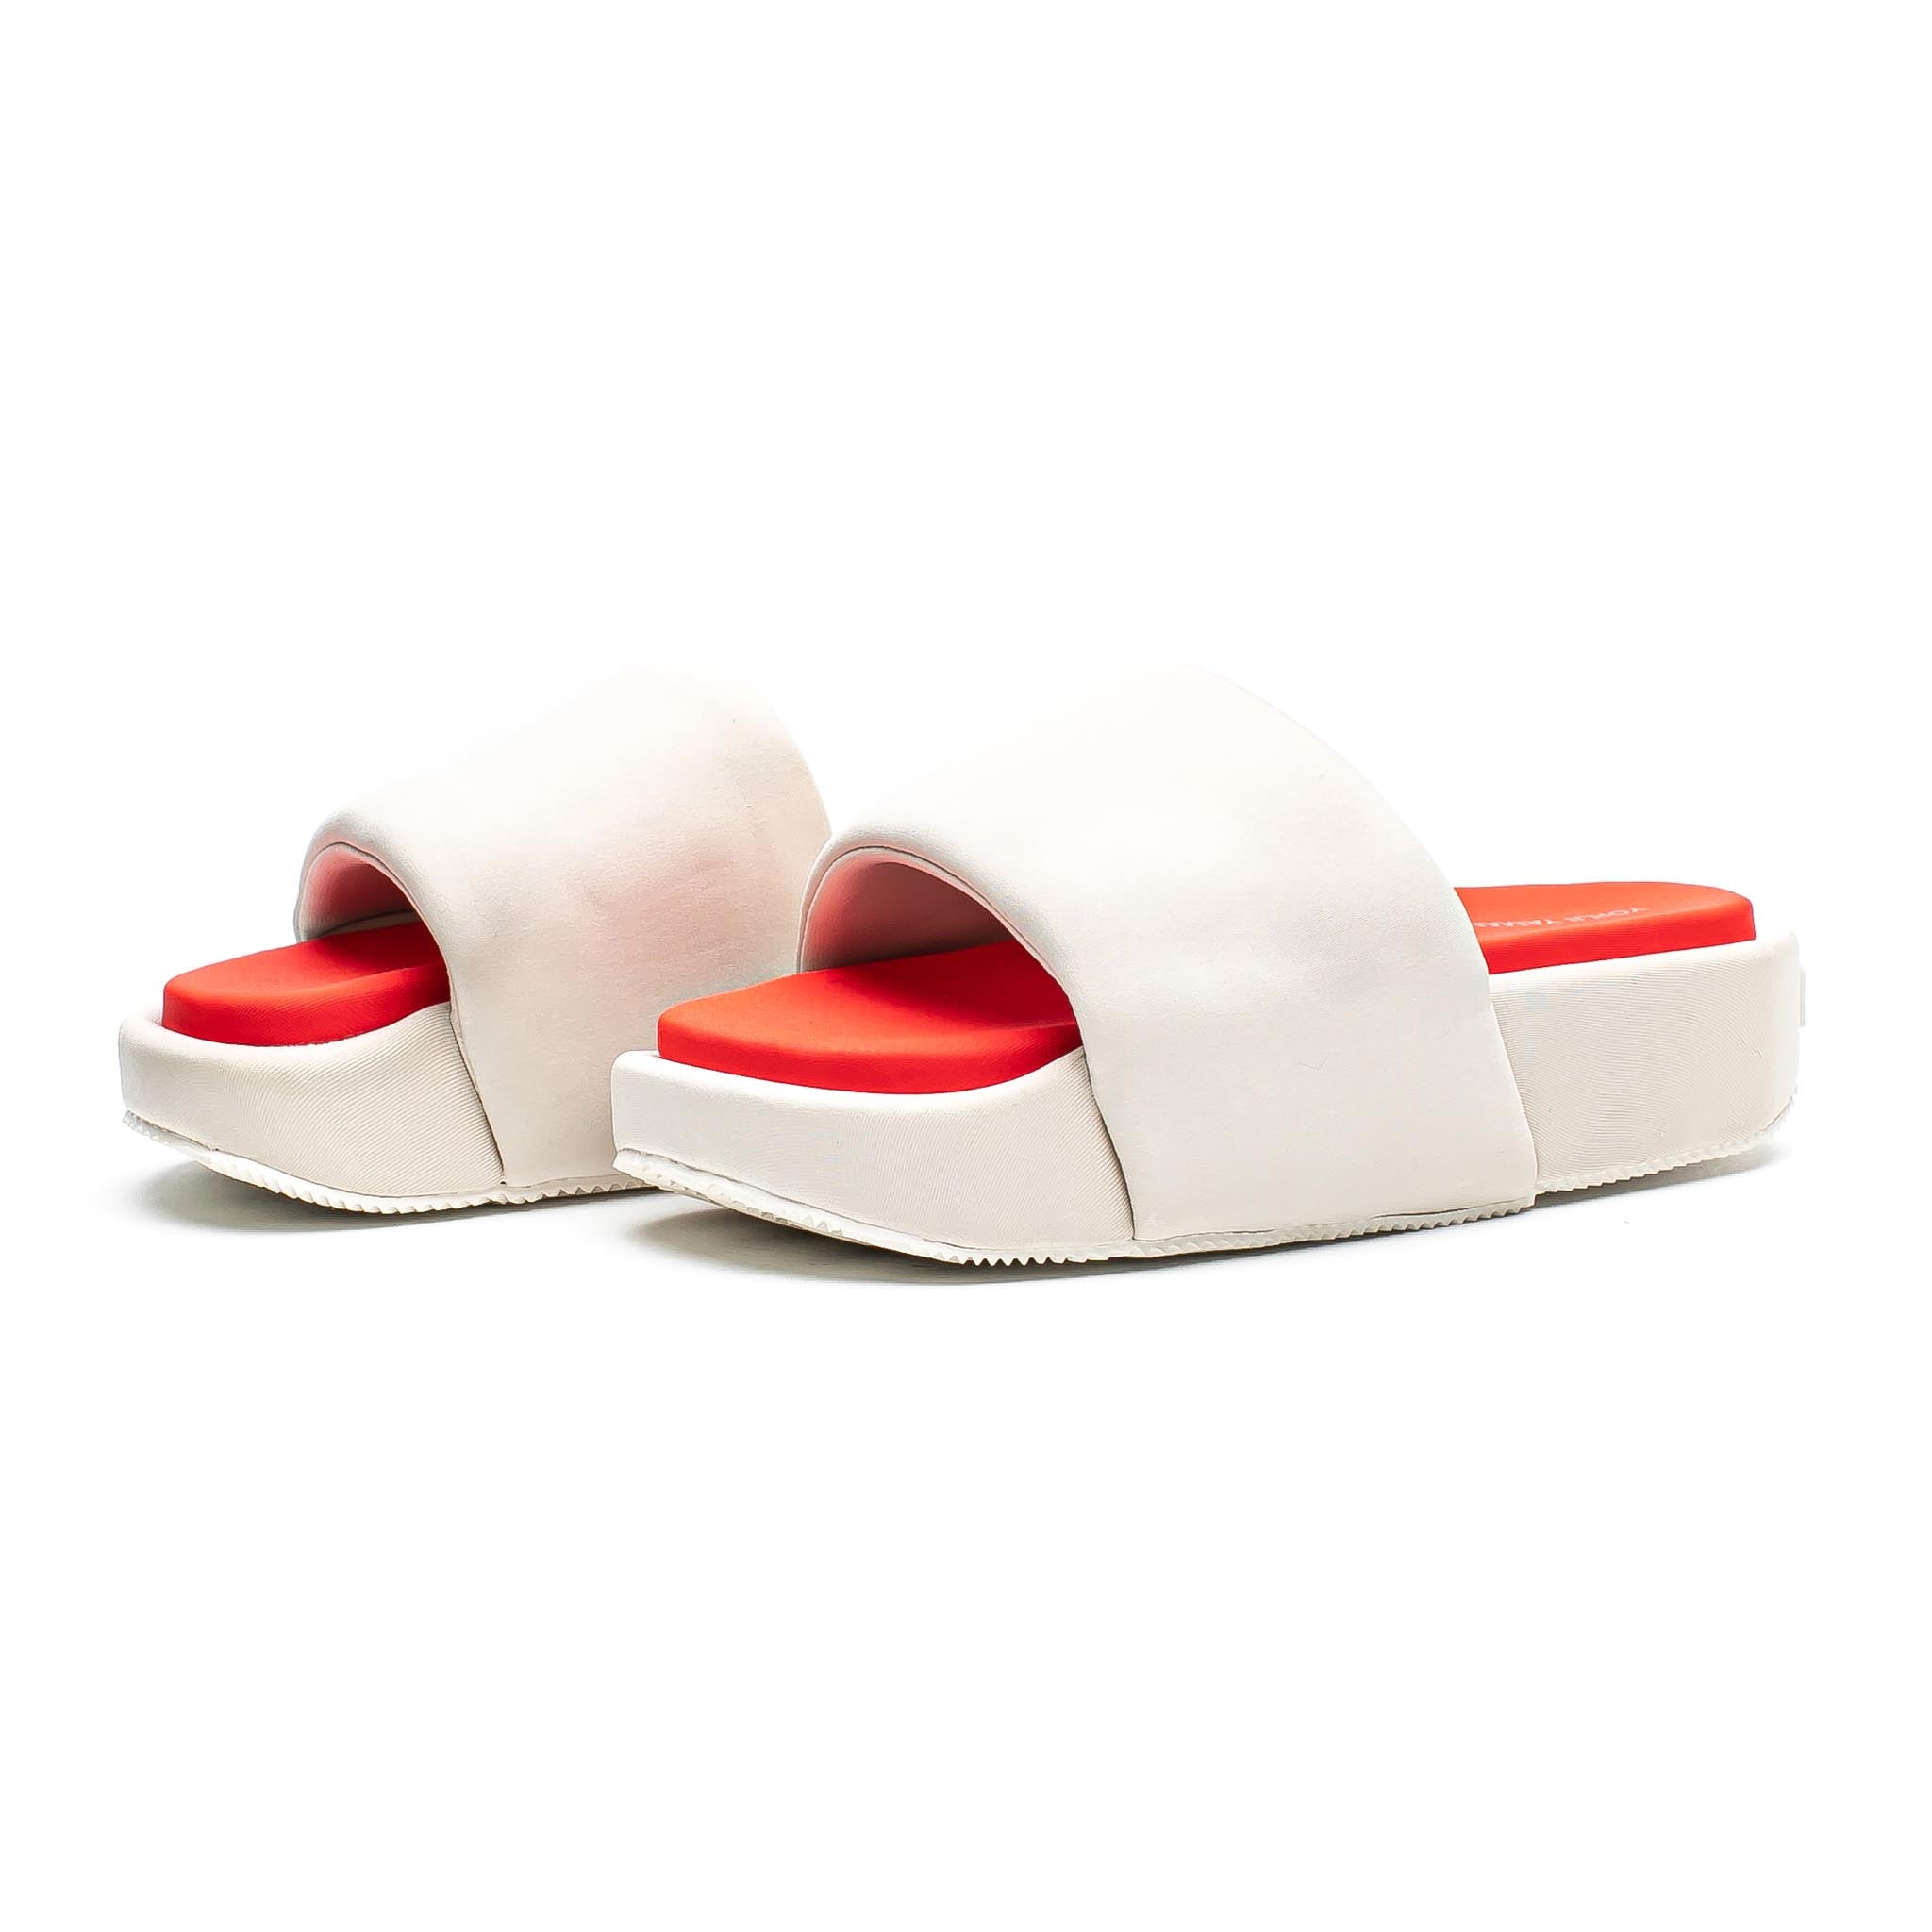 ADIDAS Y-3 Slides Cleabrown/Red